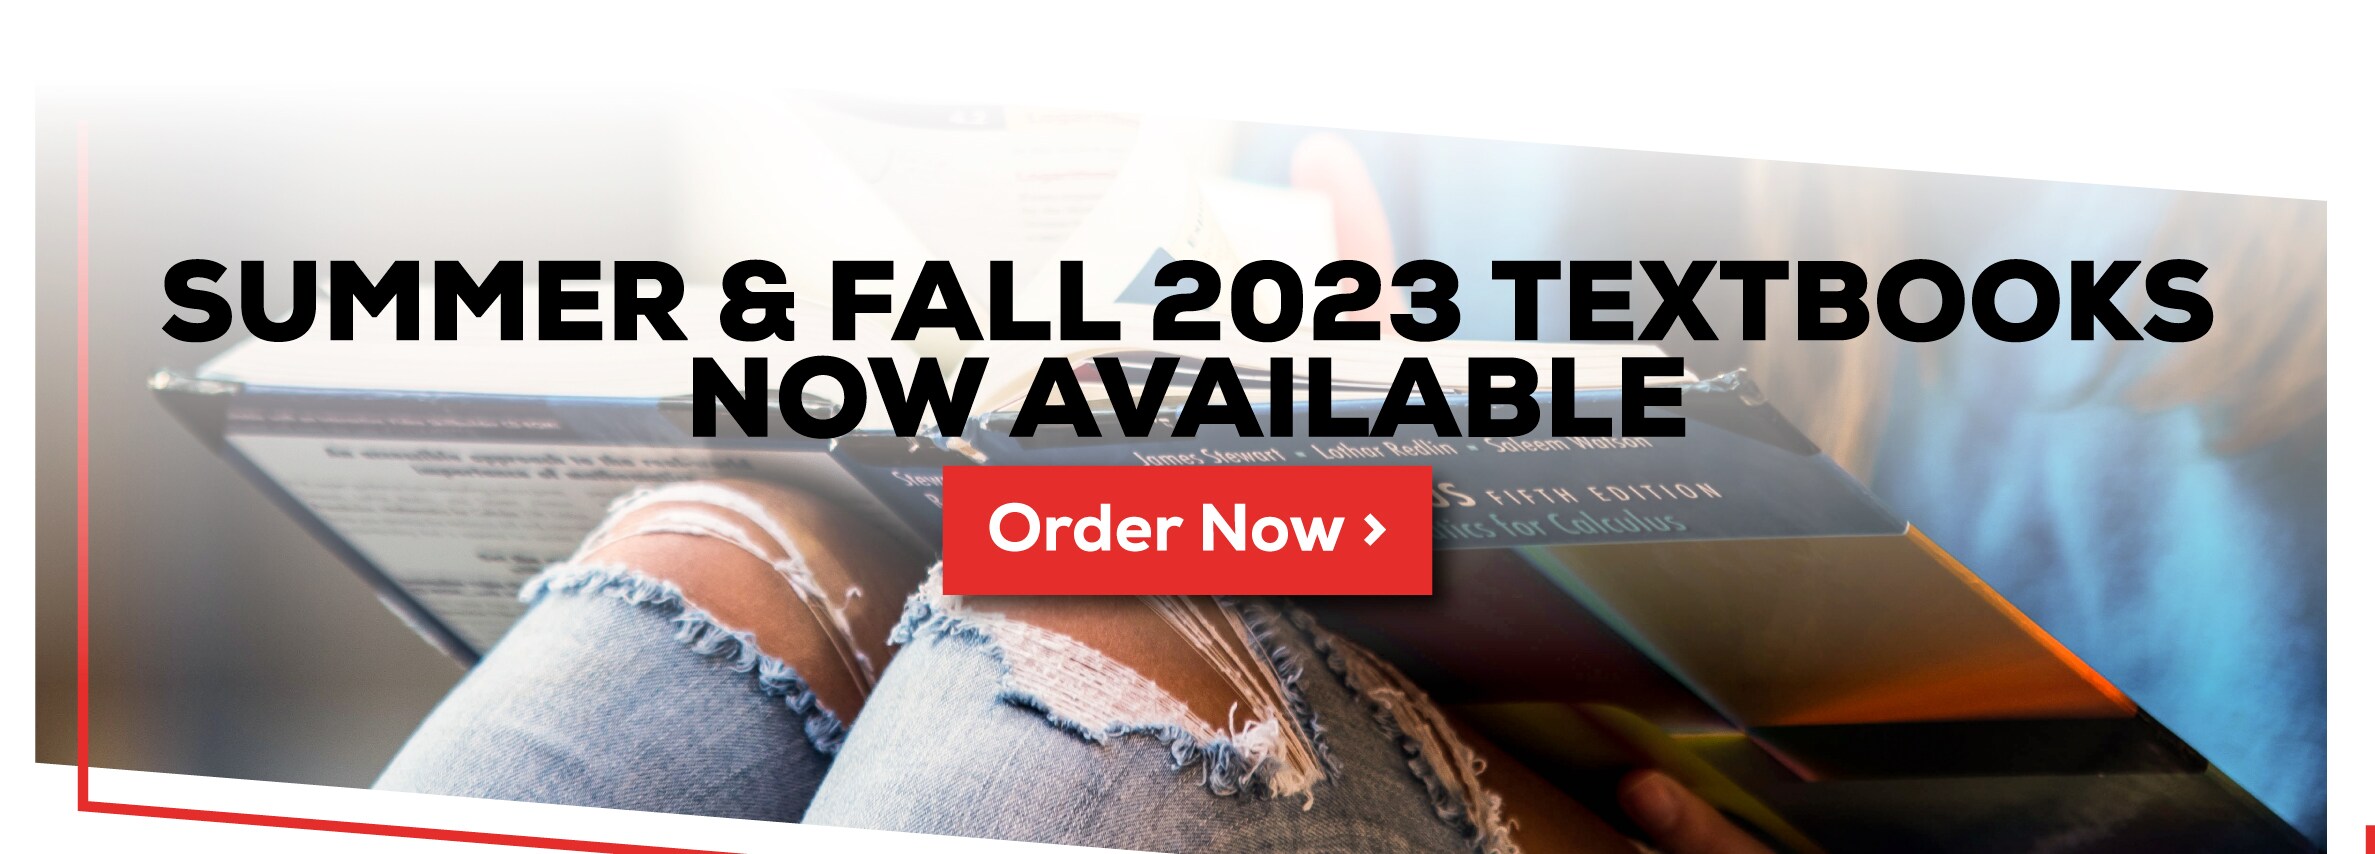 Summer & Fall 2023 Textbooks Now Available. Order Now.